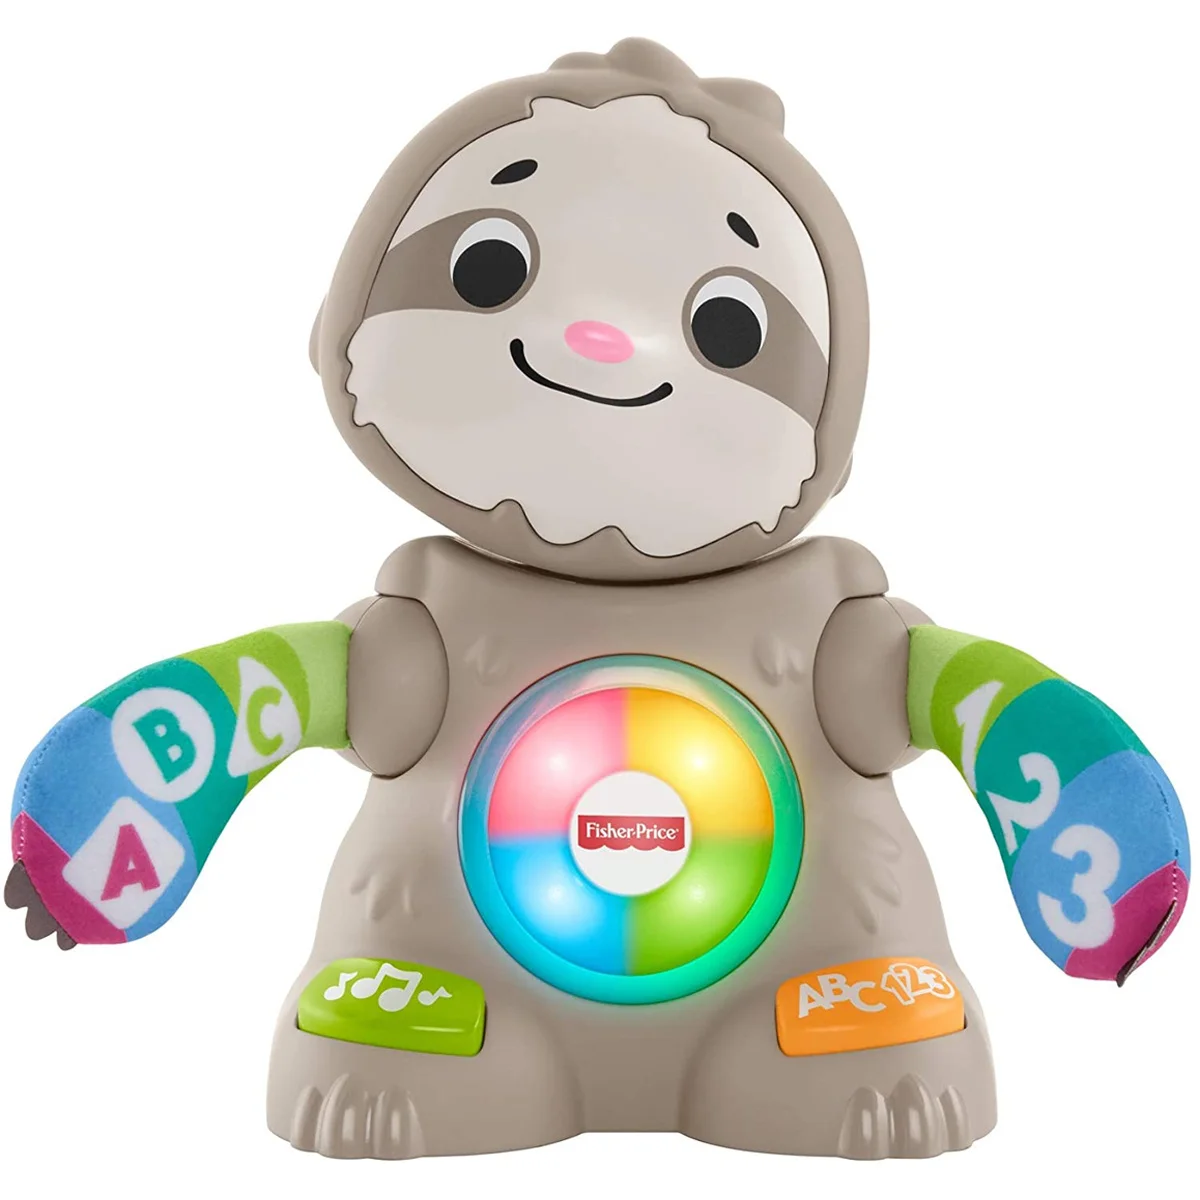 Fisher Price Smooth Moves Sloth Interactive Educational Toy with Music Lights and Motion for Baby Ag